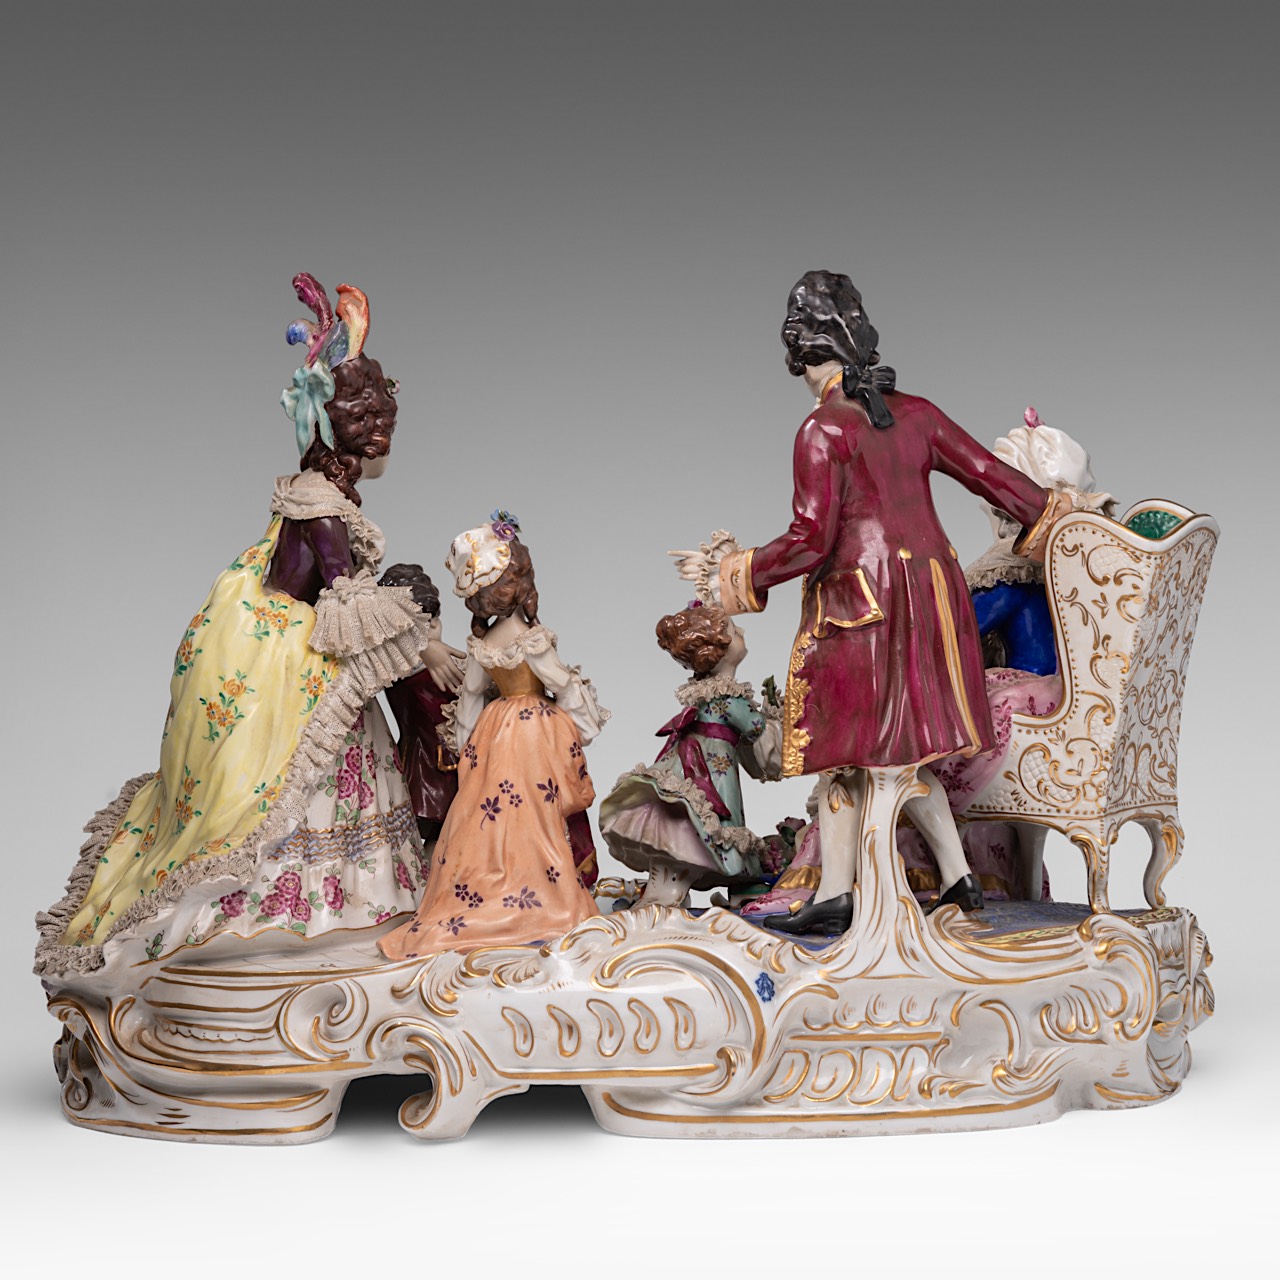 A large Saxony polychrome porcelain group depicting a gallant scene in a Rococo setting, H 40 - W 55 - Image 4 of 15